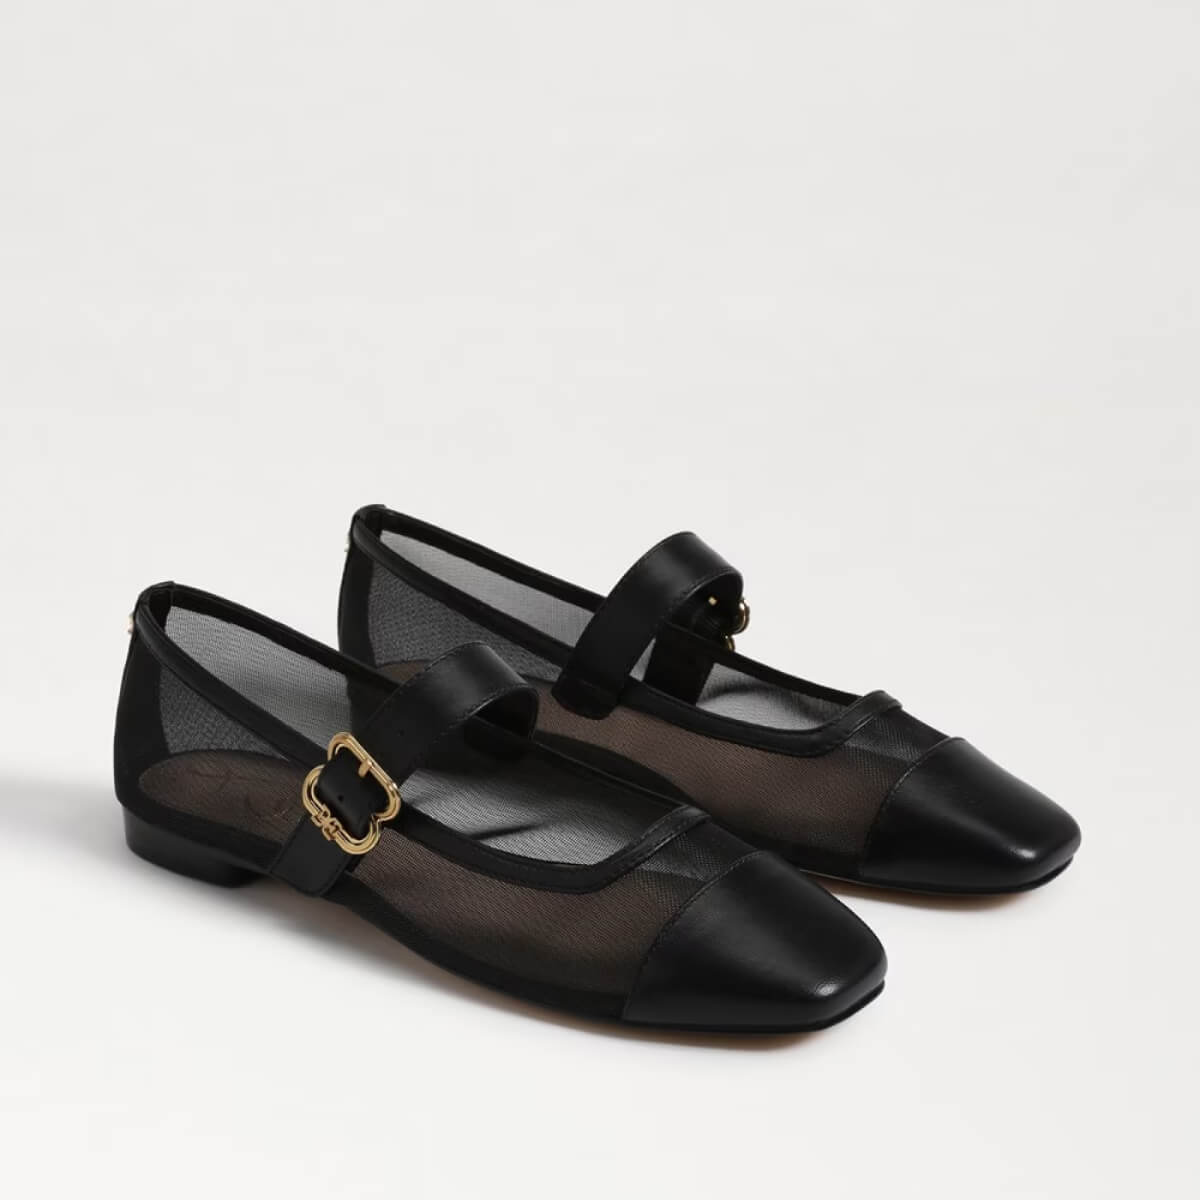 Sam Edelman Miranda Mary Jane Flat black top | MILK MONEY milkmoney.co | cute shoes for women. ladies shoes. nice shoes for women. footwear for women. ladies shoes online. ladies footwear. womens shoes and boots. pretty shoes for women. beautiful shoes for women. 